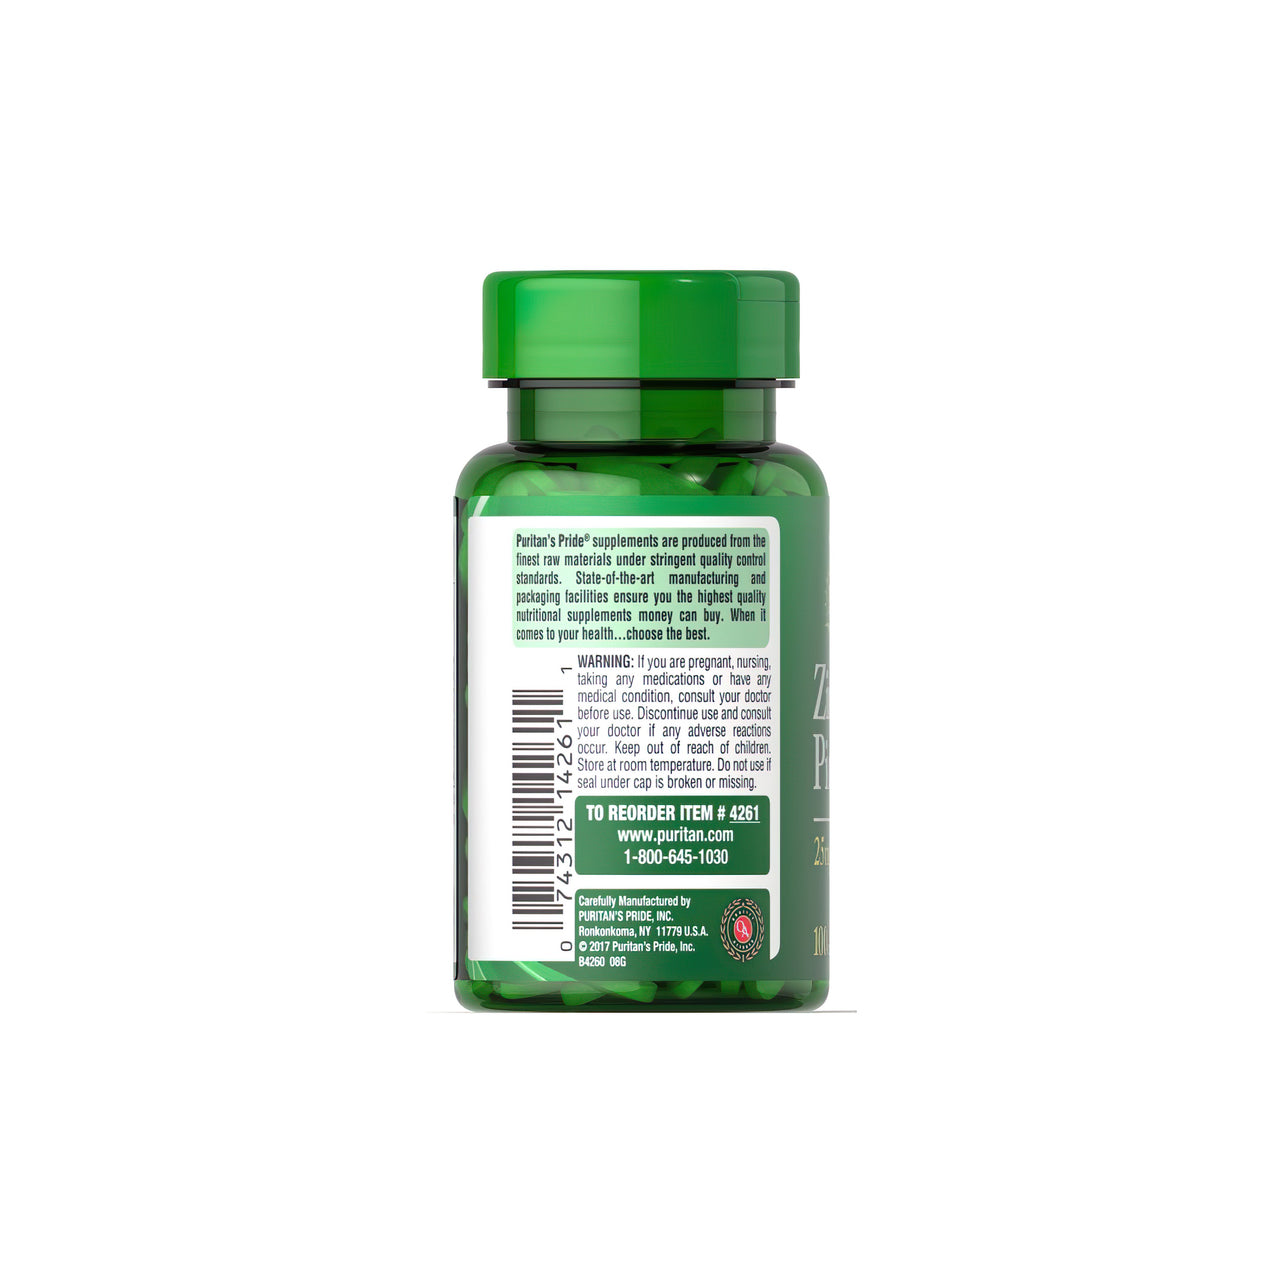 A bottle of Puritan's Pride Zinc Picolinate 25mg 100 Caplets on a white background, promoting skin health.